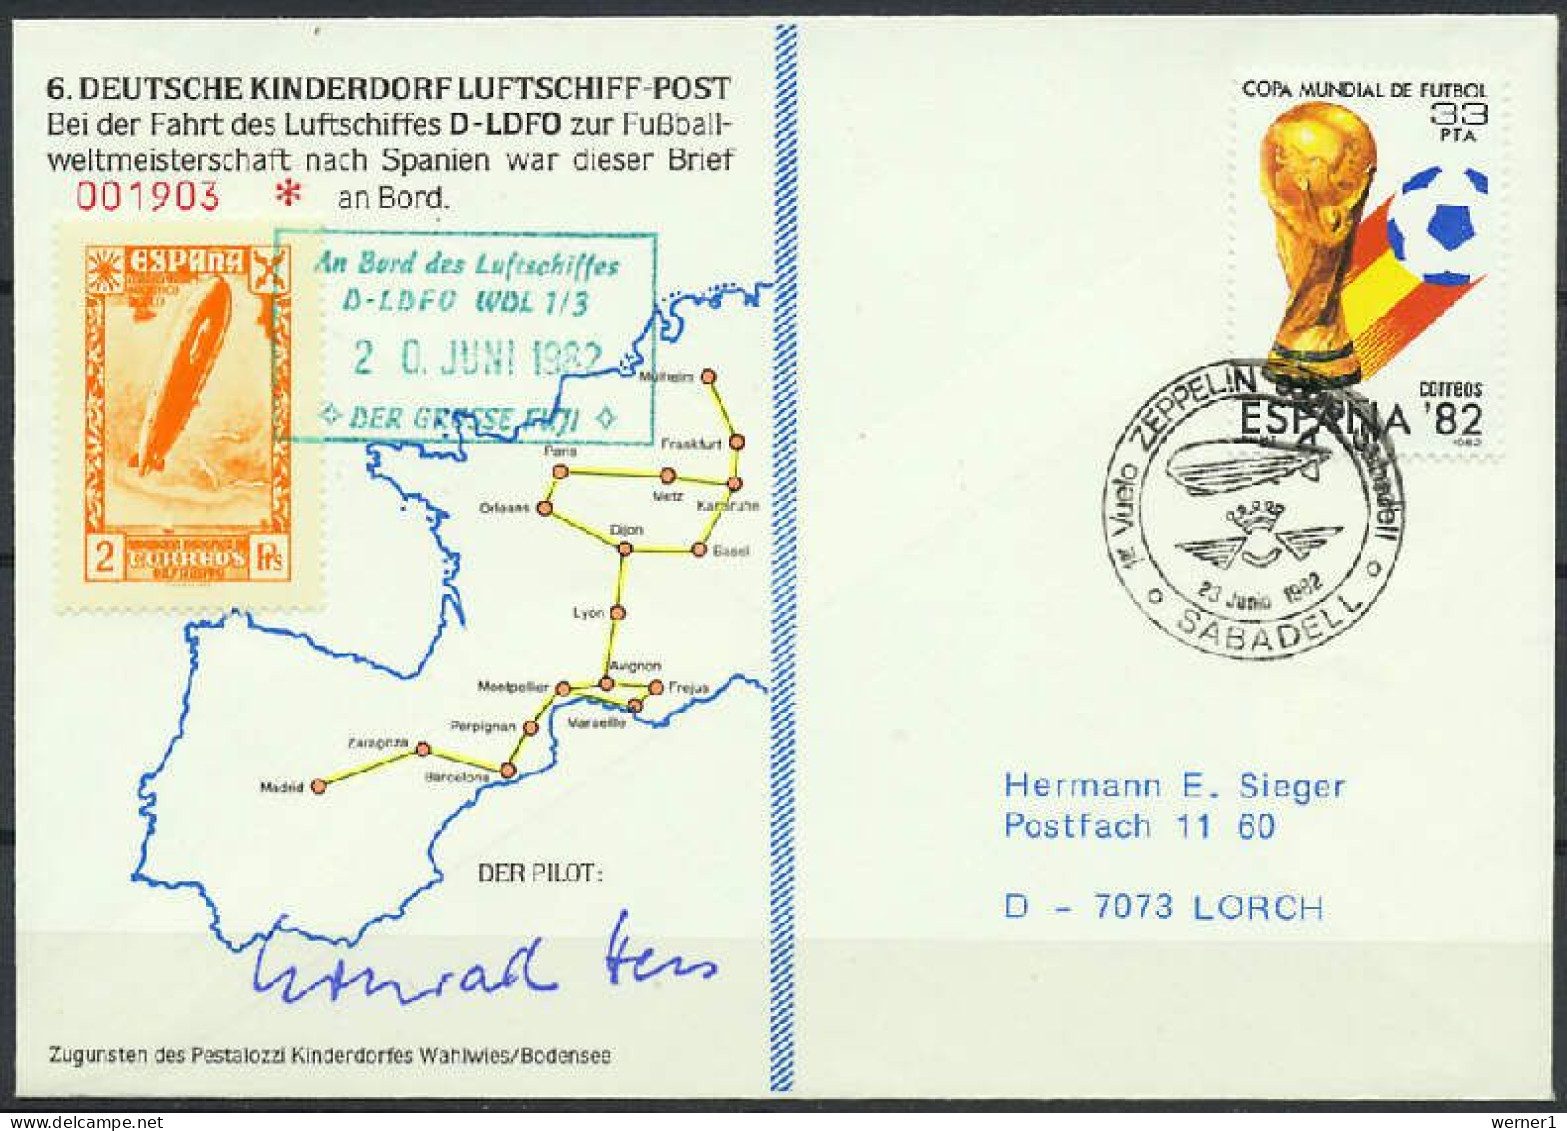 Spain 1982 Football Soccer World Cup, Zeppelin Flight Cover Carried On Bord Airship D-LDFO "Der Grosse Fuji" - 1982 – Espagne